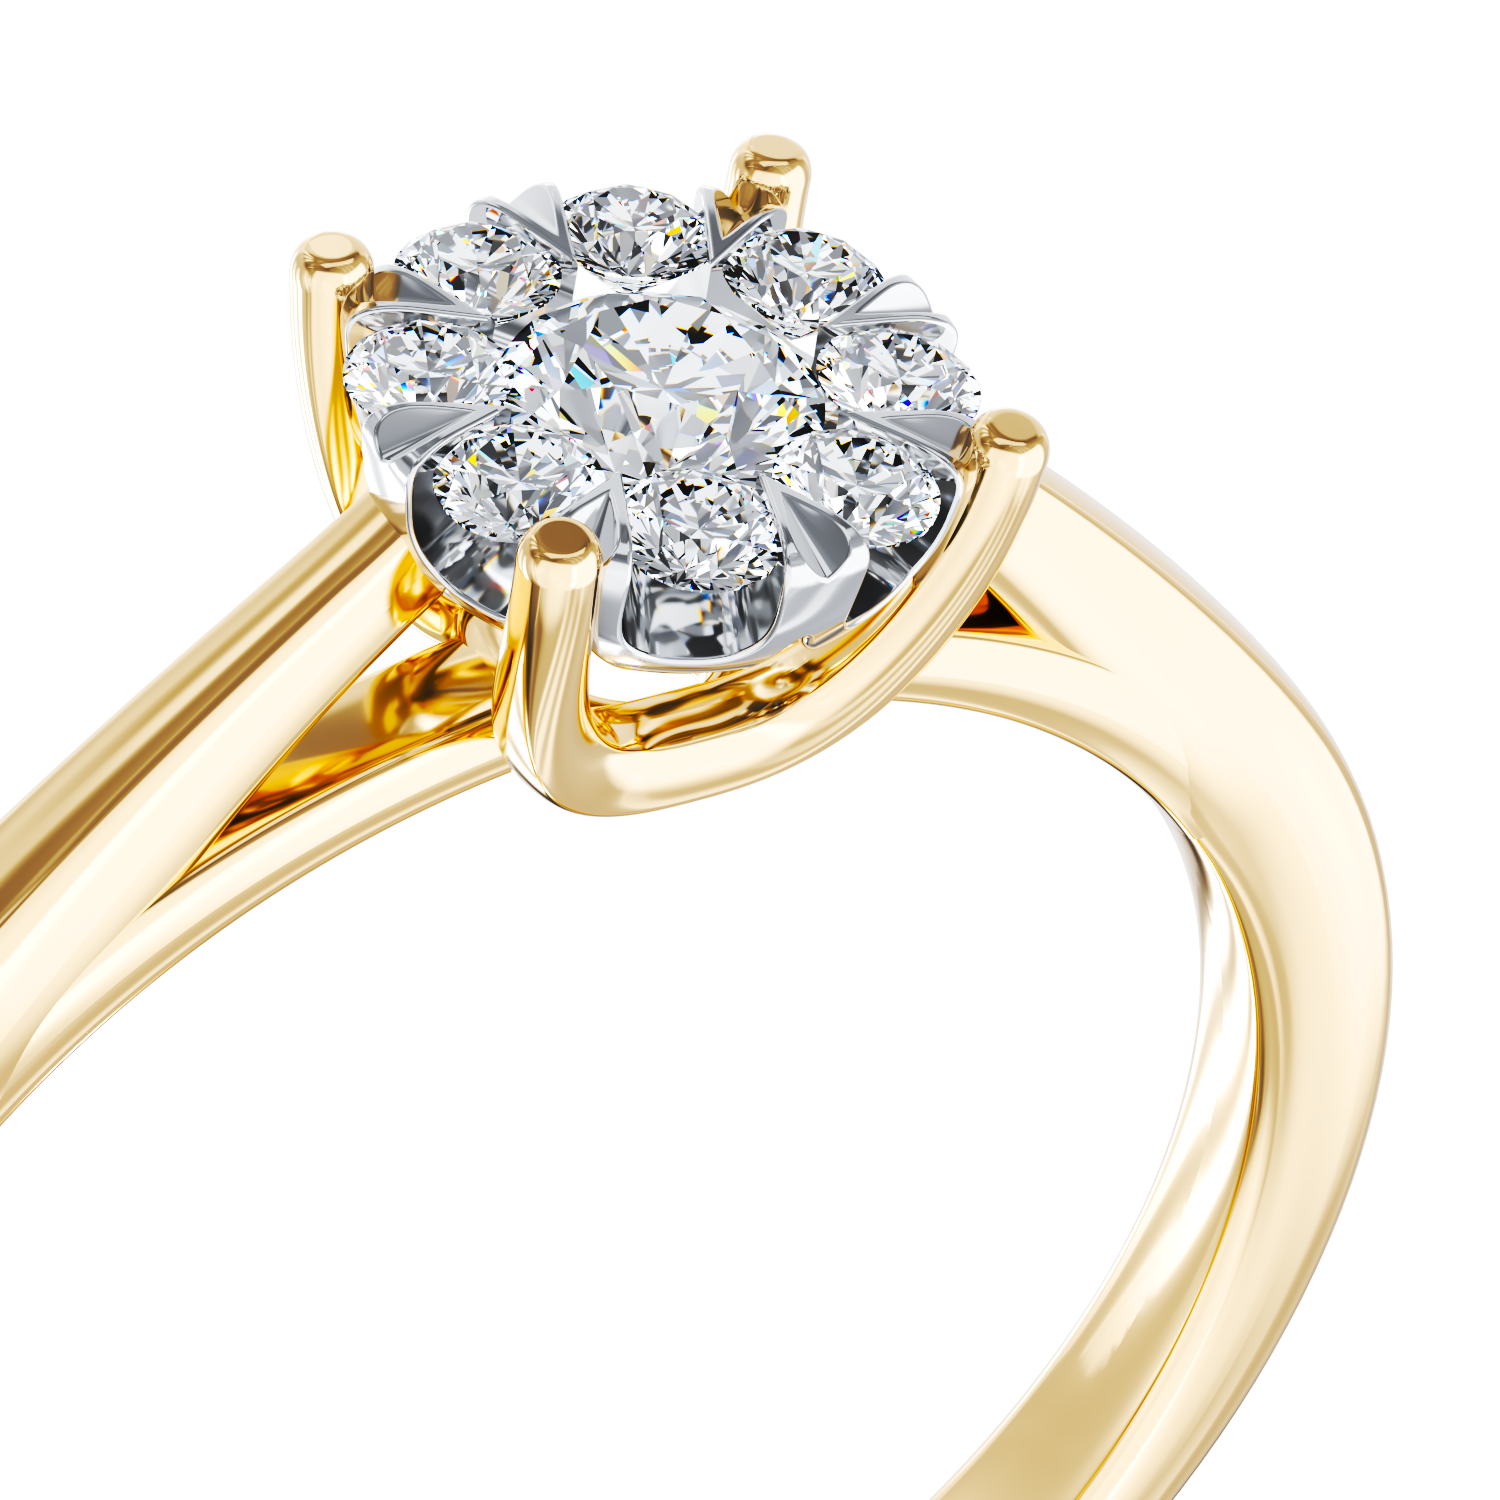 18K yellow gold engagement ring with 0.255ct diamonds